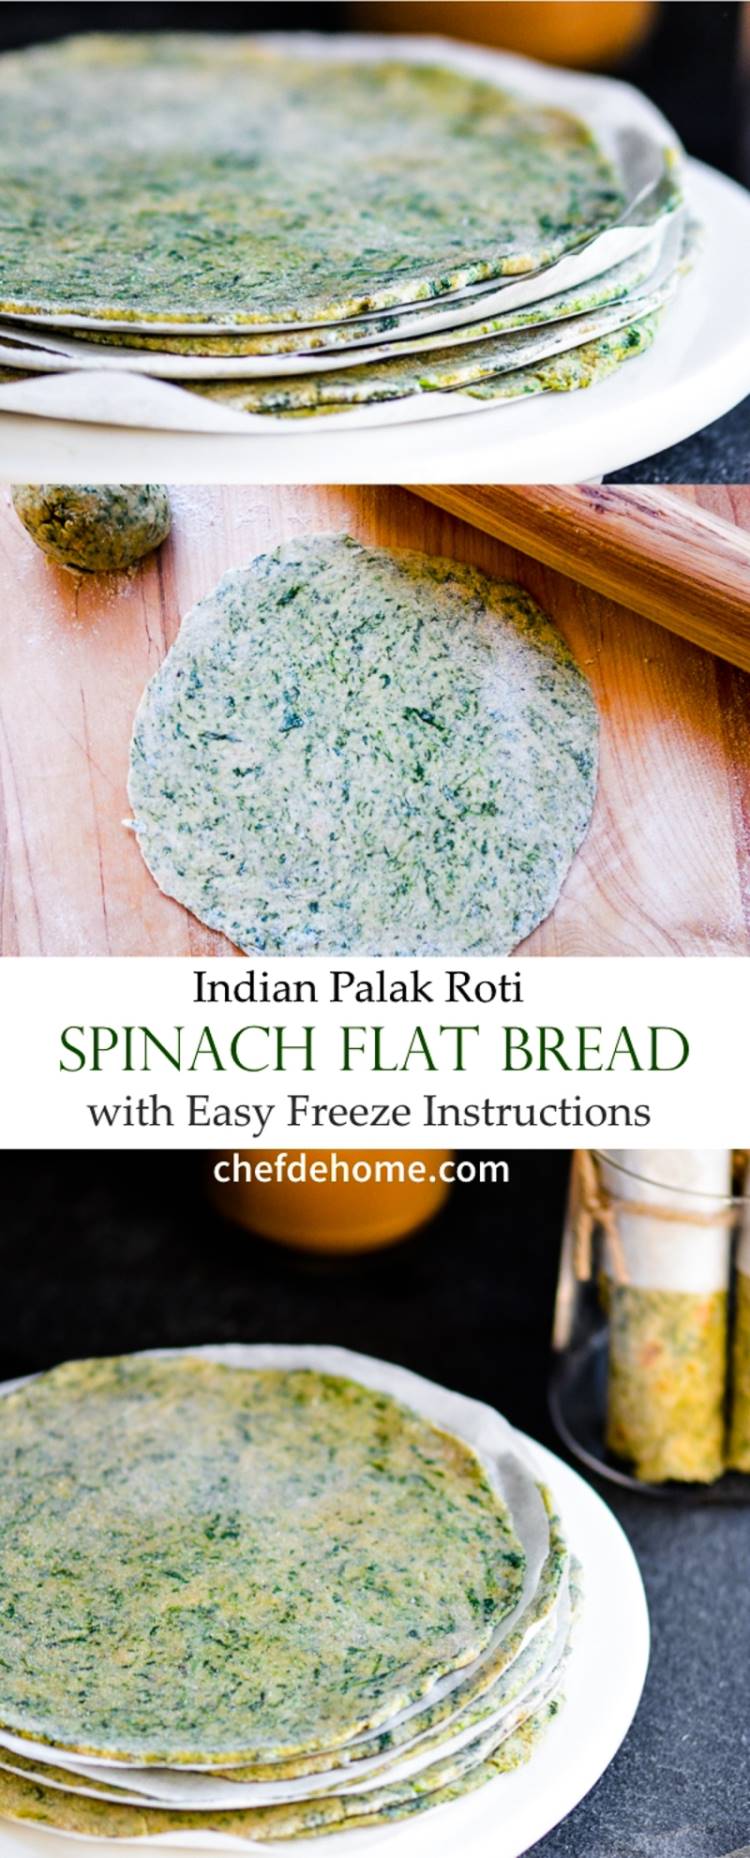  Freeze your own Indian Spinach Flat Bread for healthy and delicious dinner bread in no time | chefdehome.com